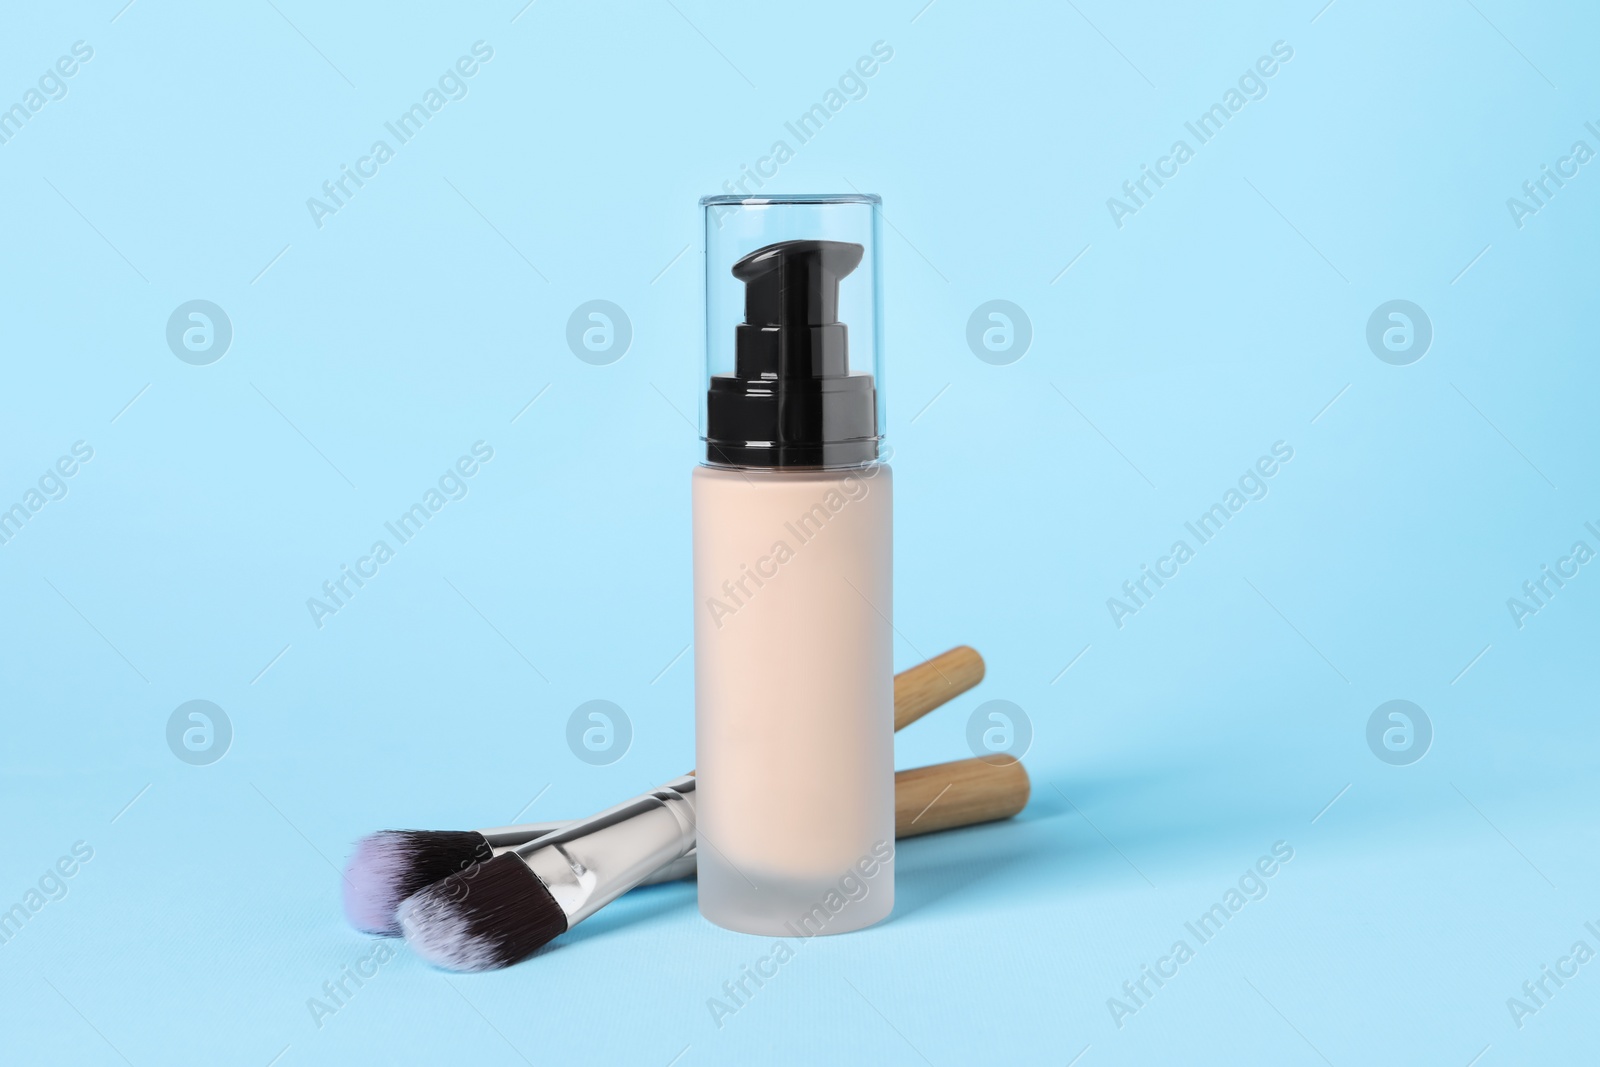 Photo of Bottle of skin foundation and brushes on light blue background. Makeup product